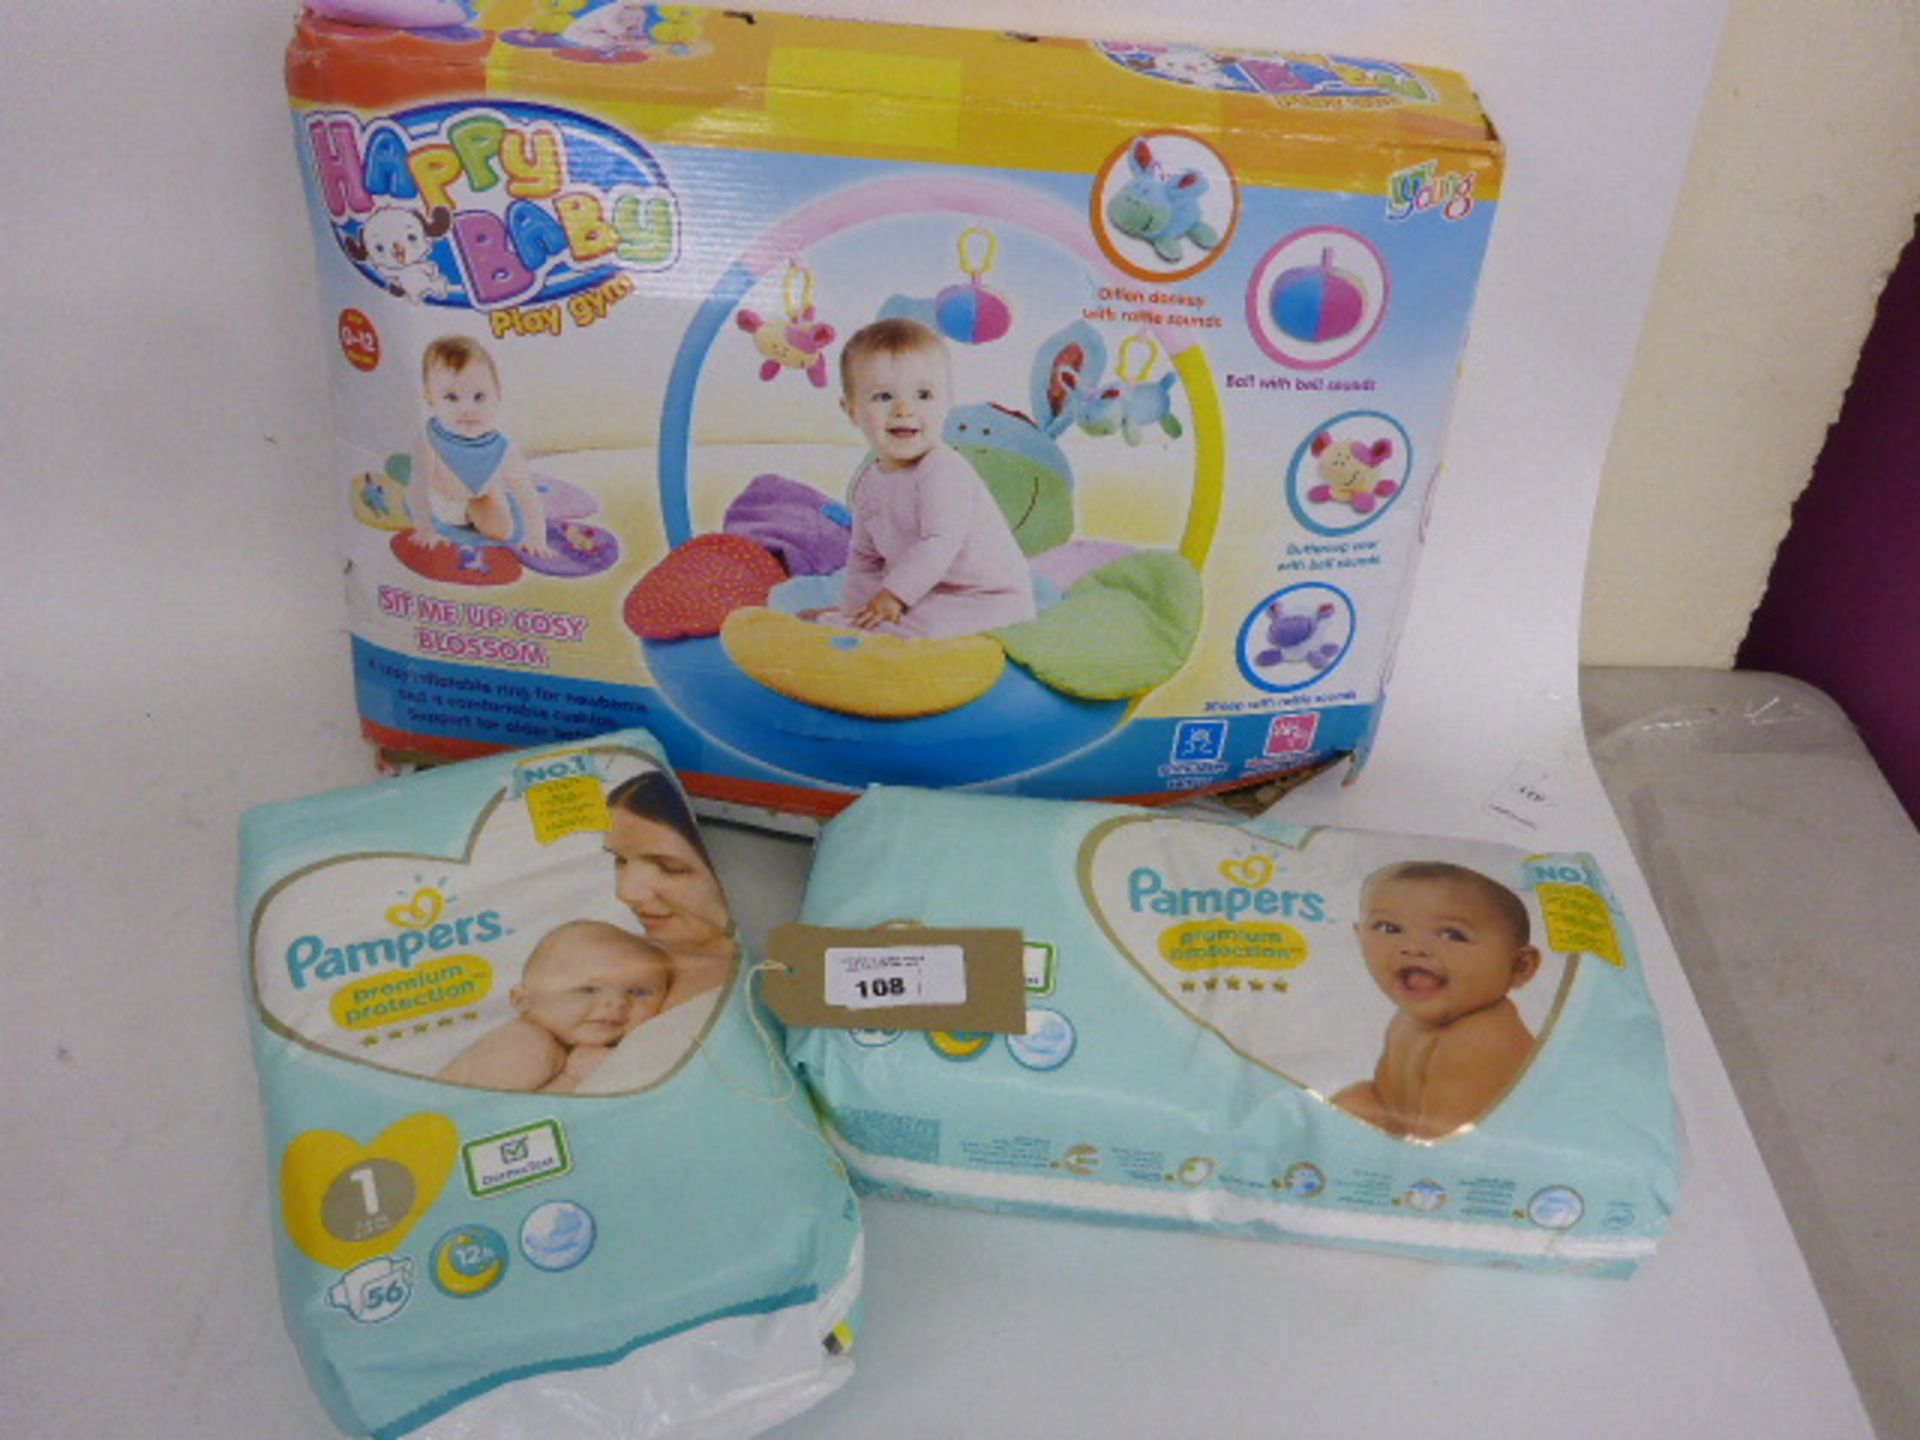 2 packs of Pampers nappies and a Happy Baby play gym